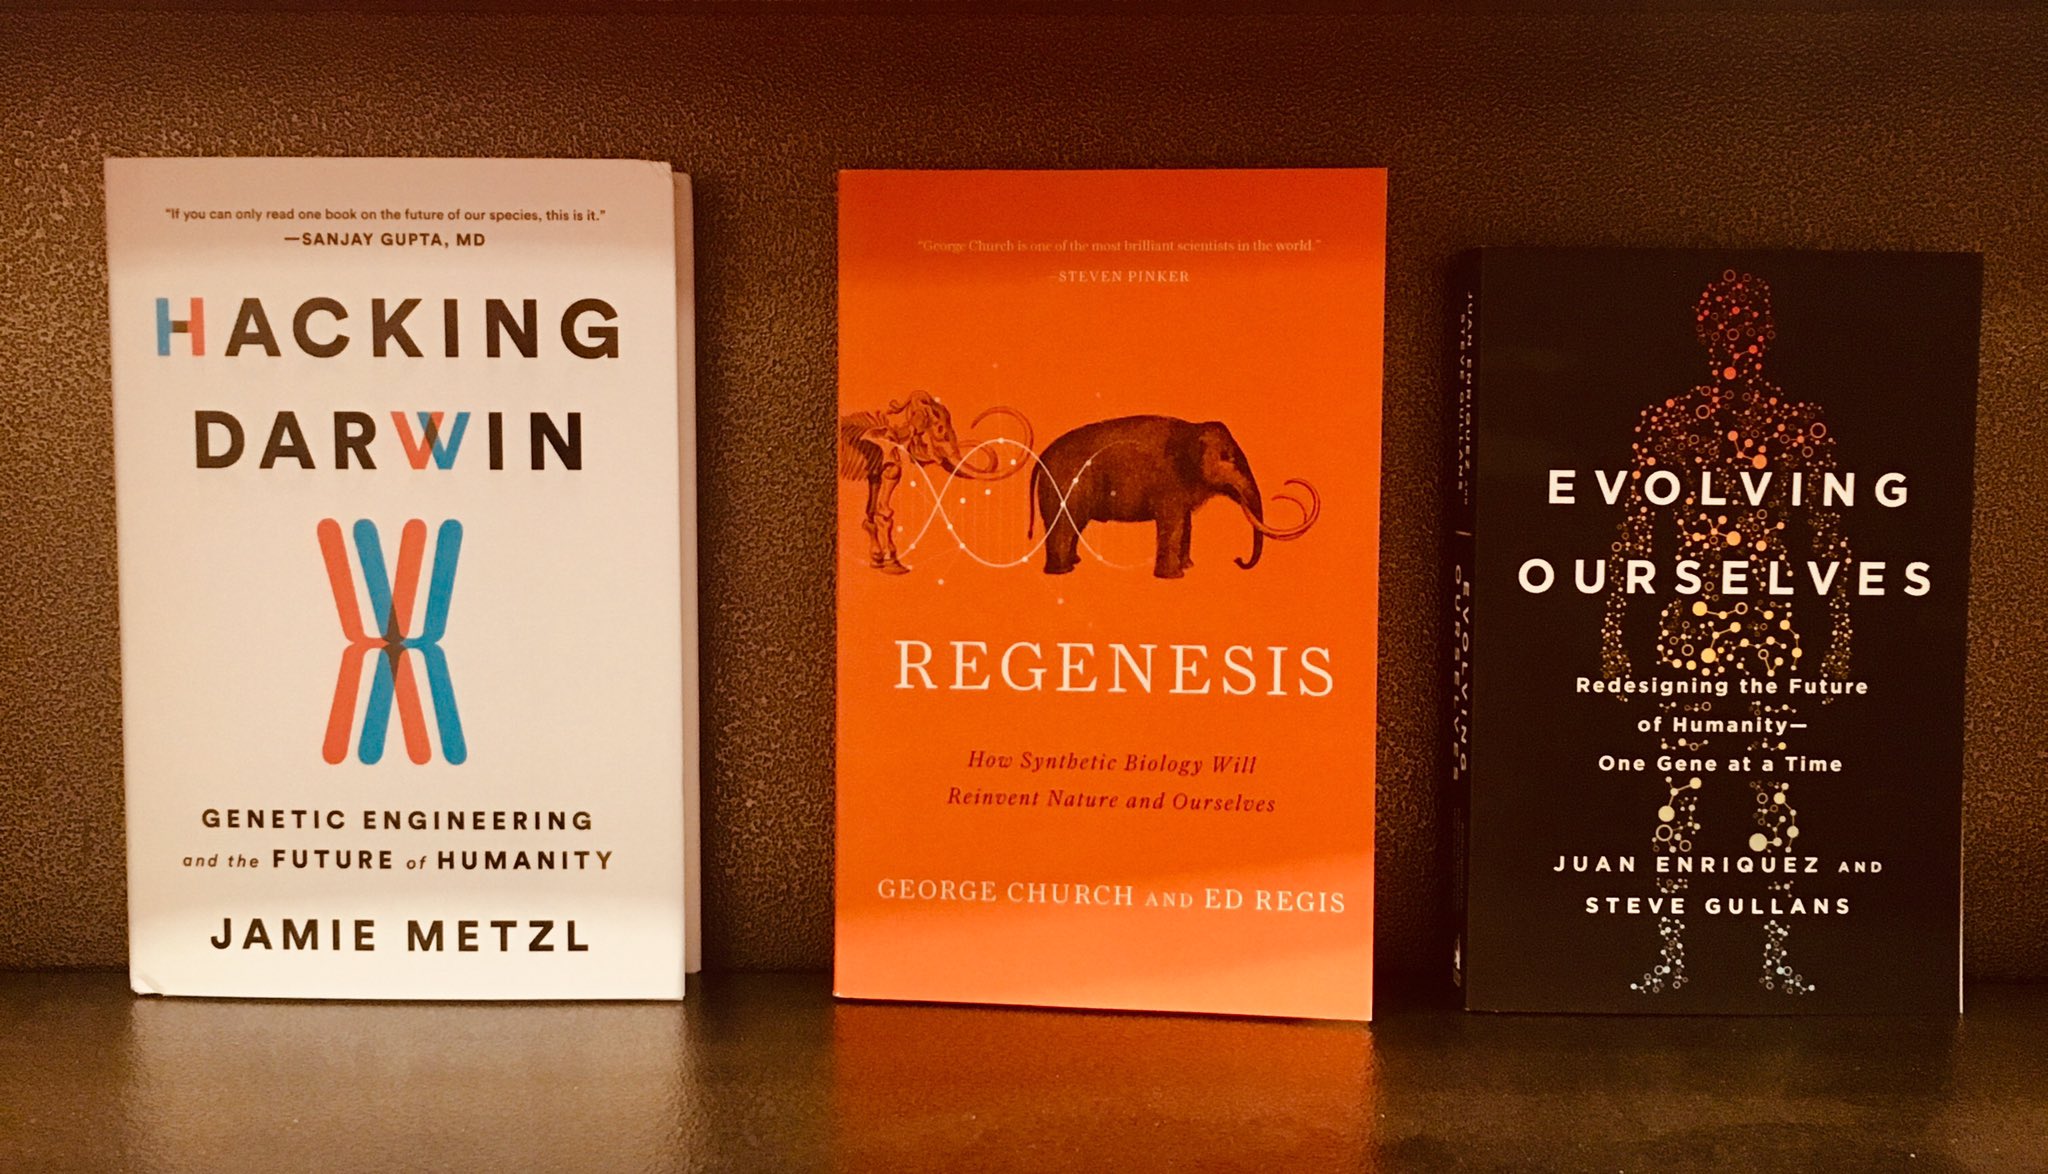 skære I forhold Charles Keasing Rodrigo Martinez on Twitter: "Final thoughts in this amazing discussion on  #HackingDarwin moderated by @RobertCGreen At @harvardcoop 'Sequence your  genome' @geochurch 'The new dominant code is life-code'@EvolvingJuan 'Store  your bio materials &